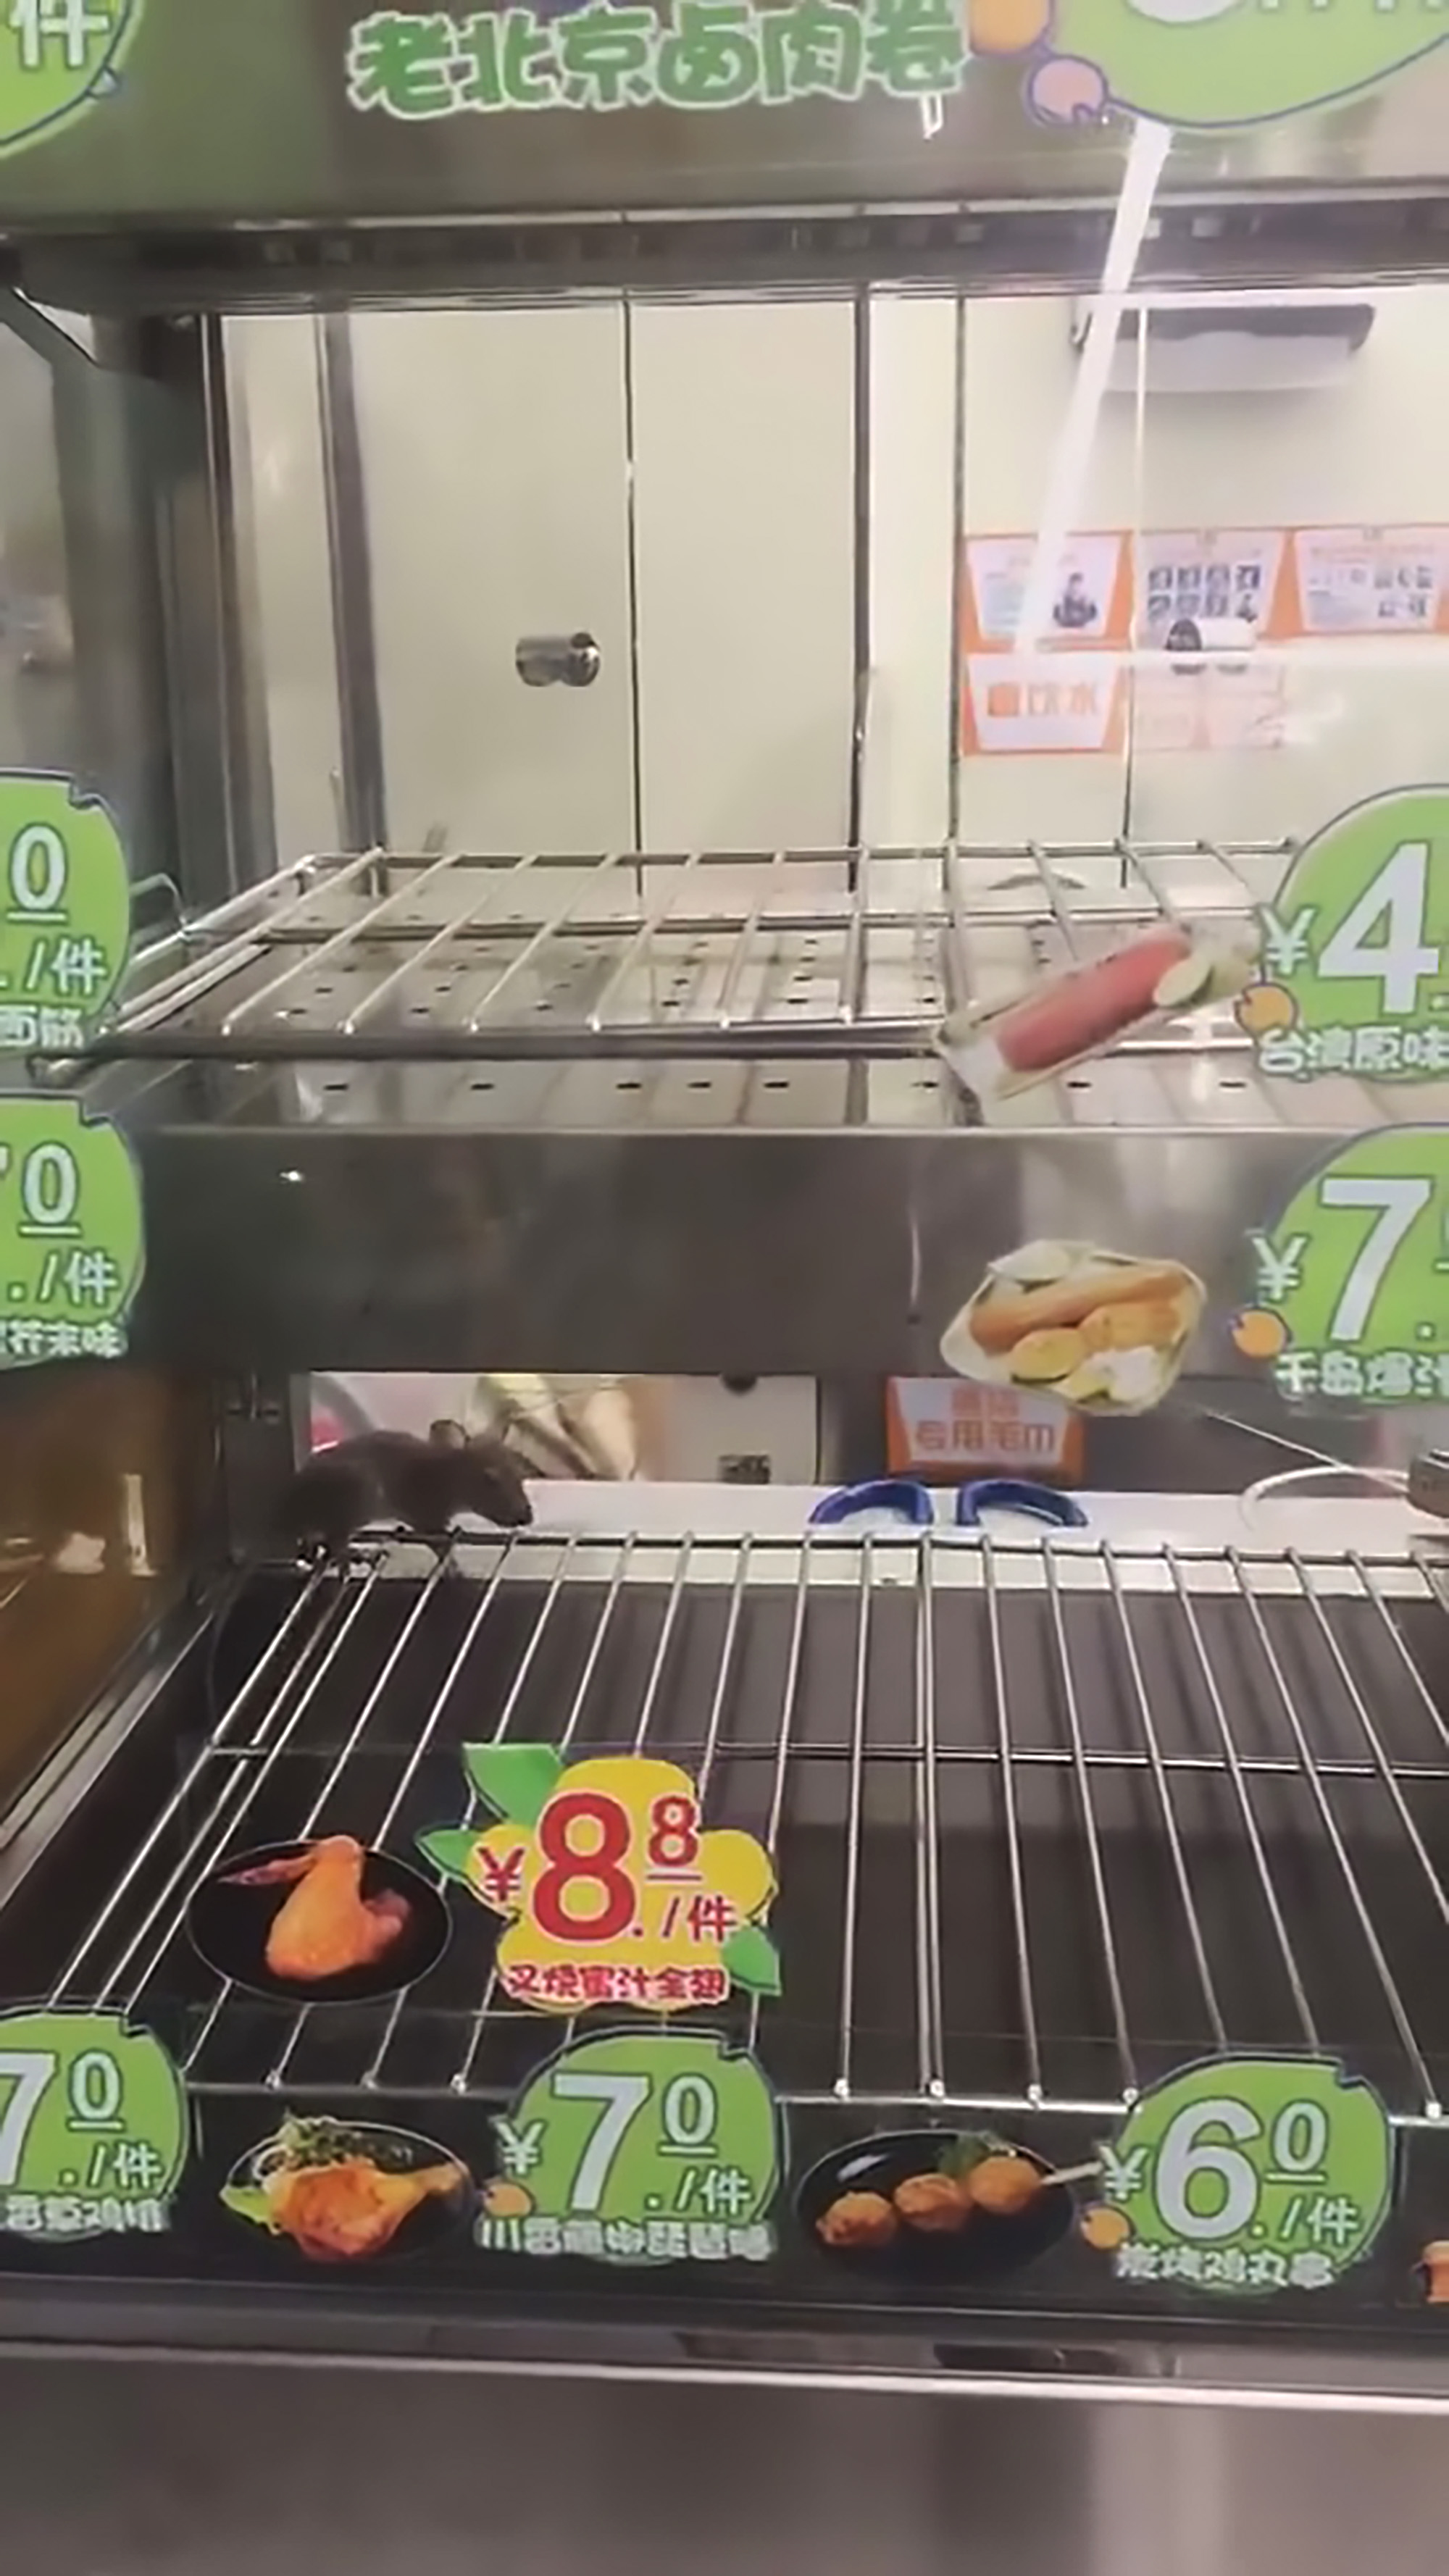 Read more about the article Rat Scurries Around Food Display In 7-Eleven Store